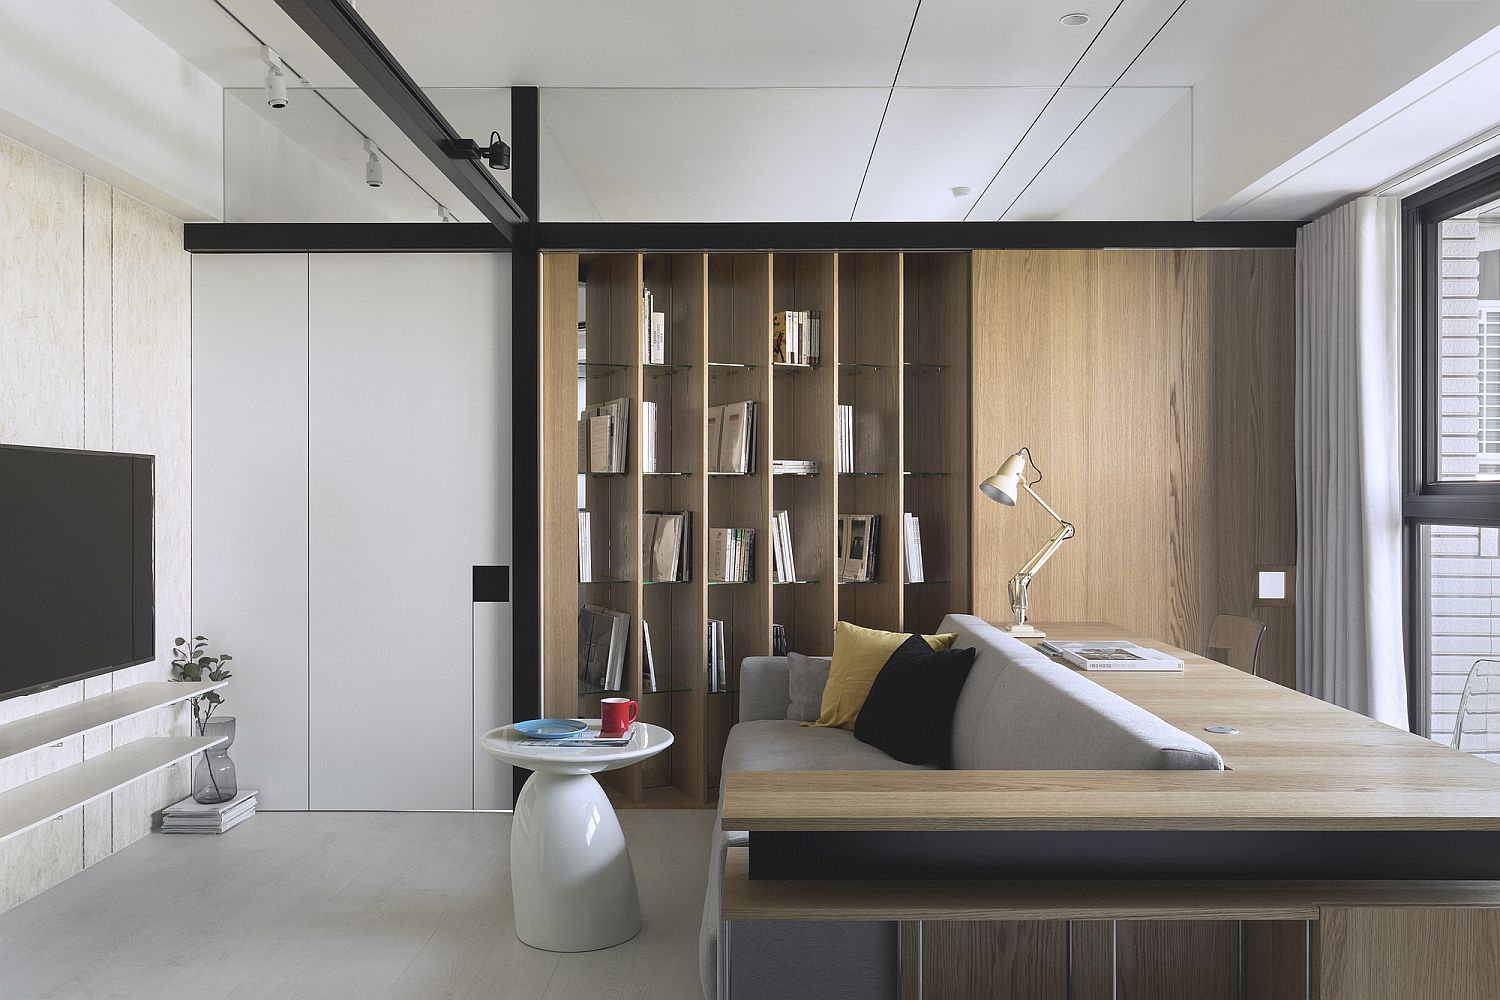 Sliding doors save space while shaping a smart contemporary interior